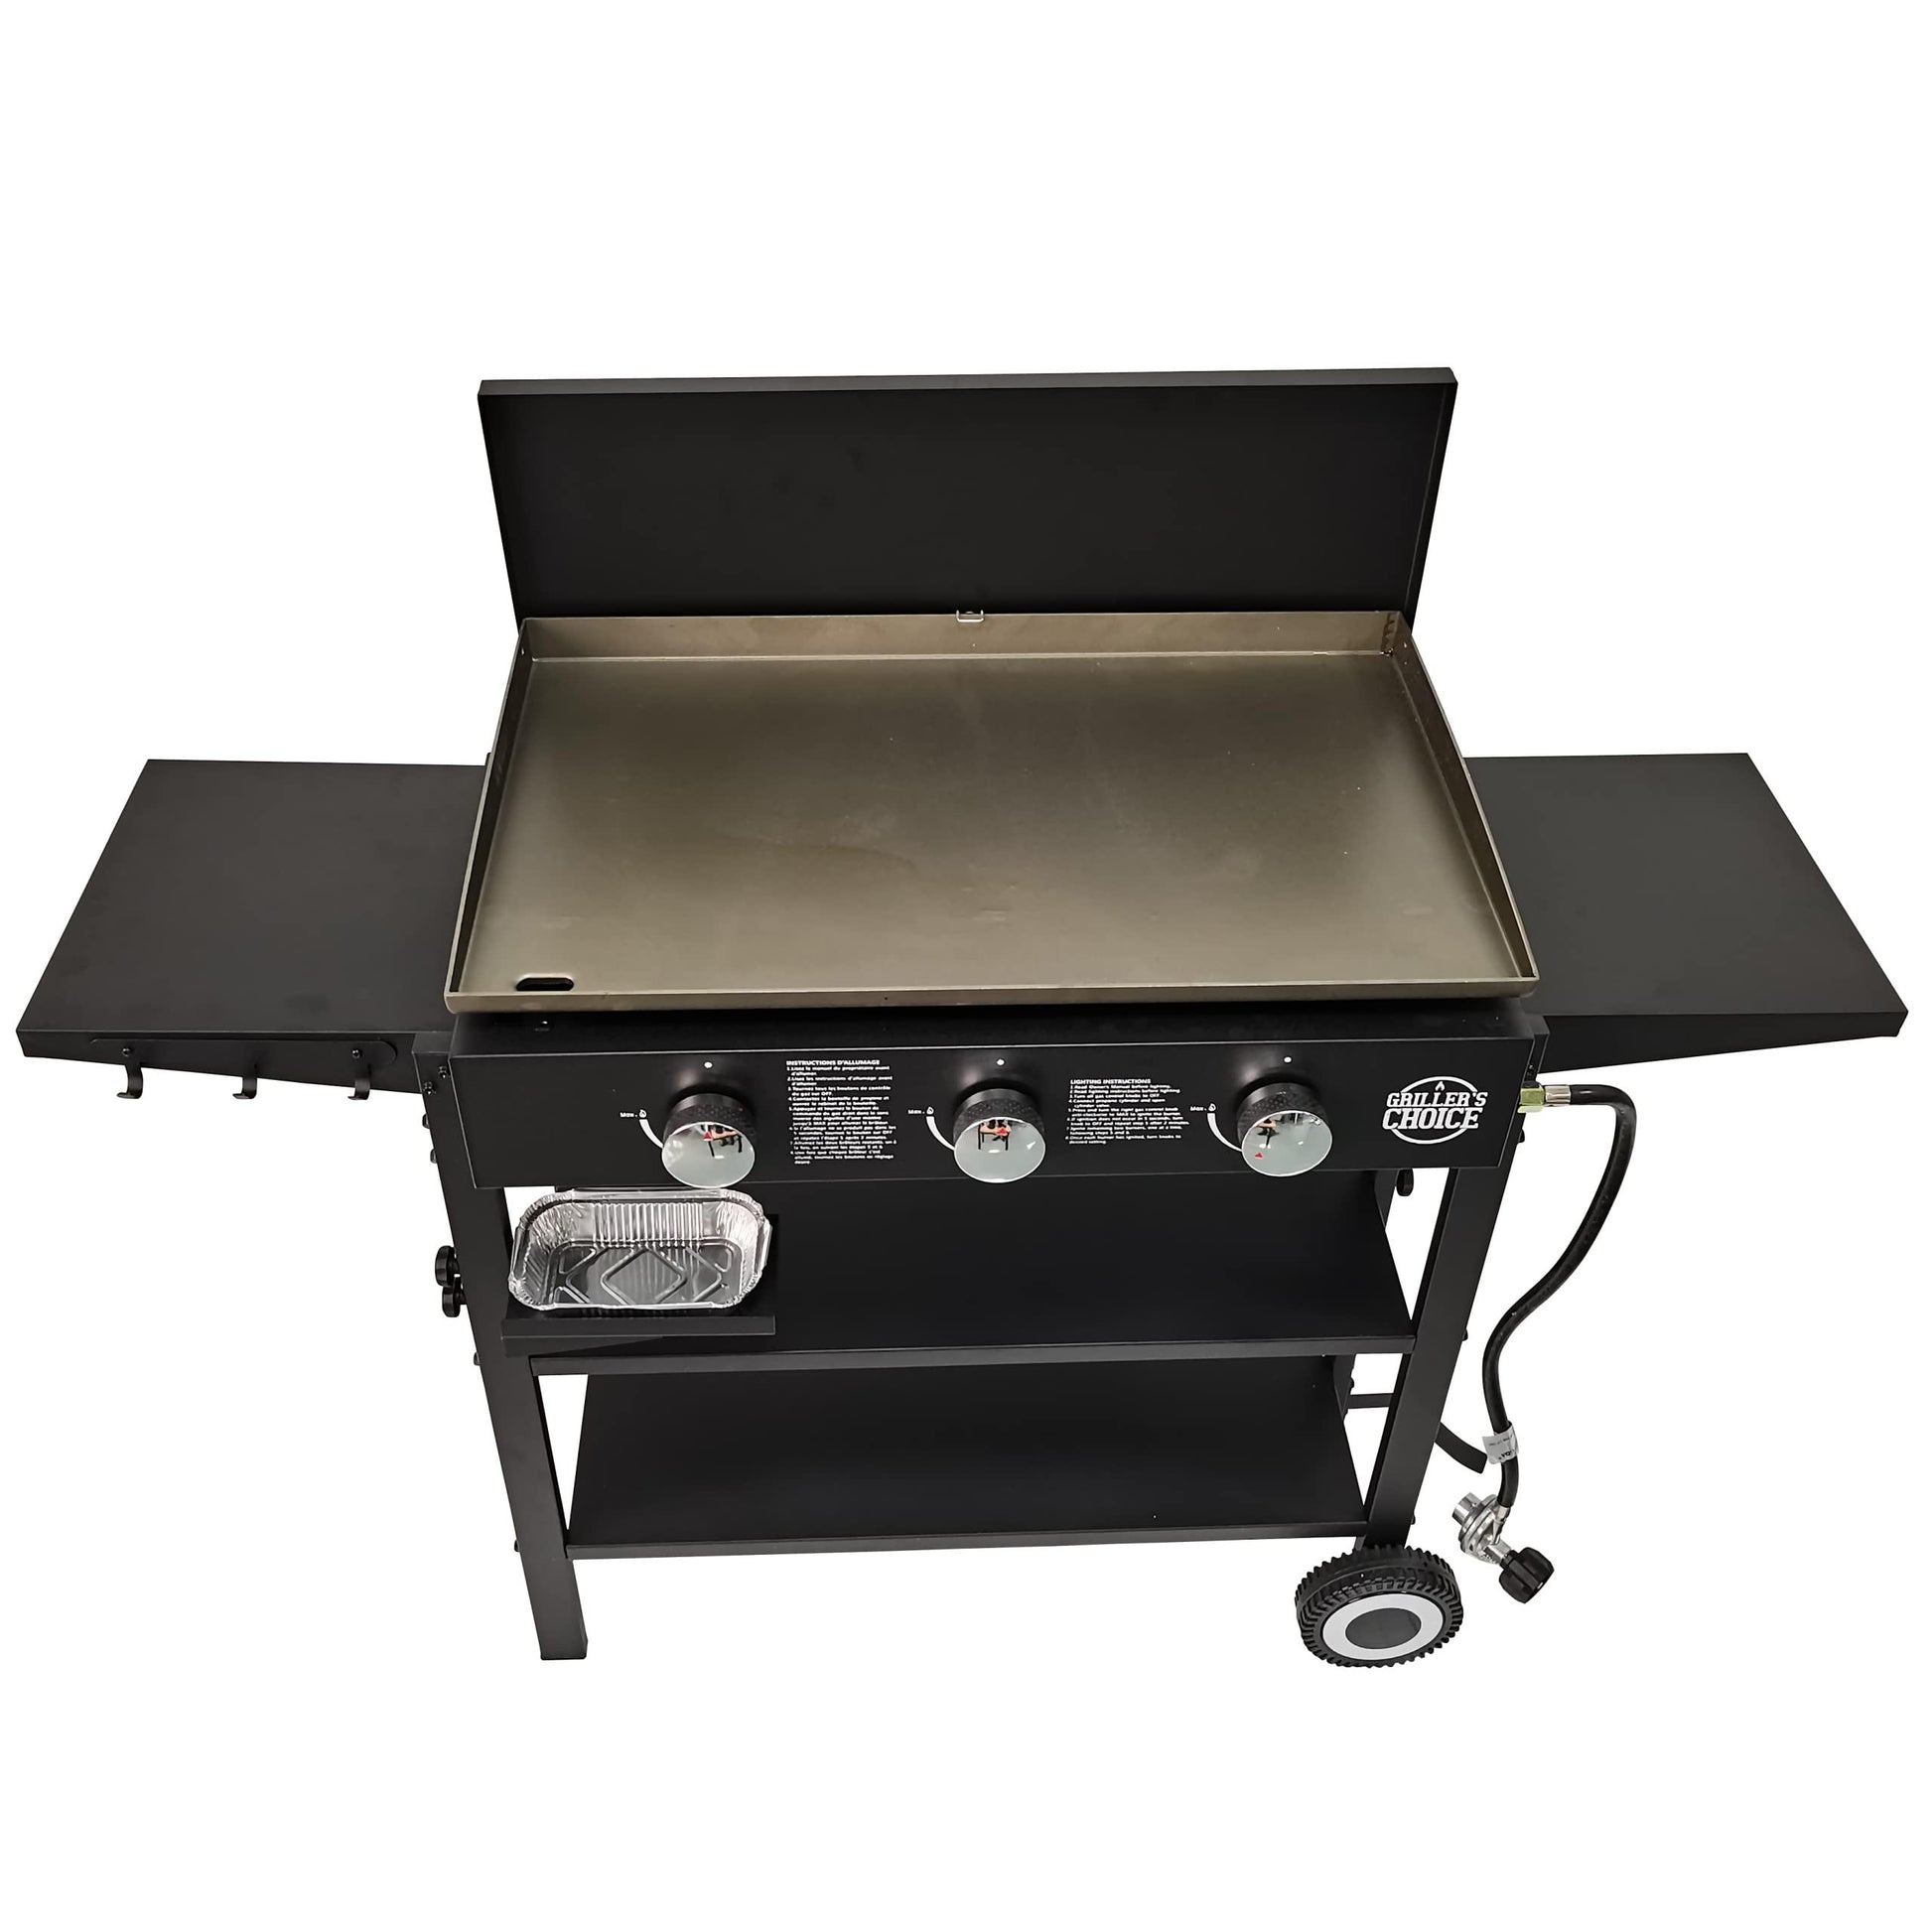 Griller's Choice Outdoor Griddle Grill Propane Gas Flat Top - Hood Included, 4 Shelves, Disposable Grease Cups, 36,000 BTU's, Large Cooking Area, Paper Towel Holder. - CookCave